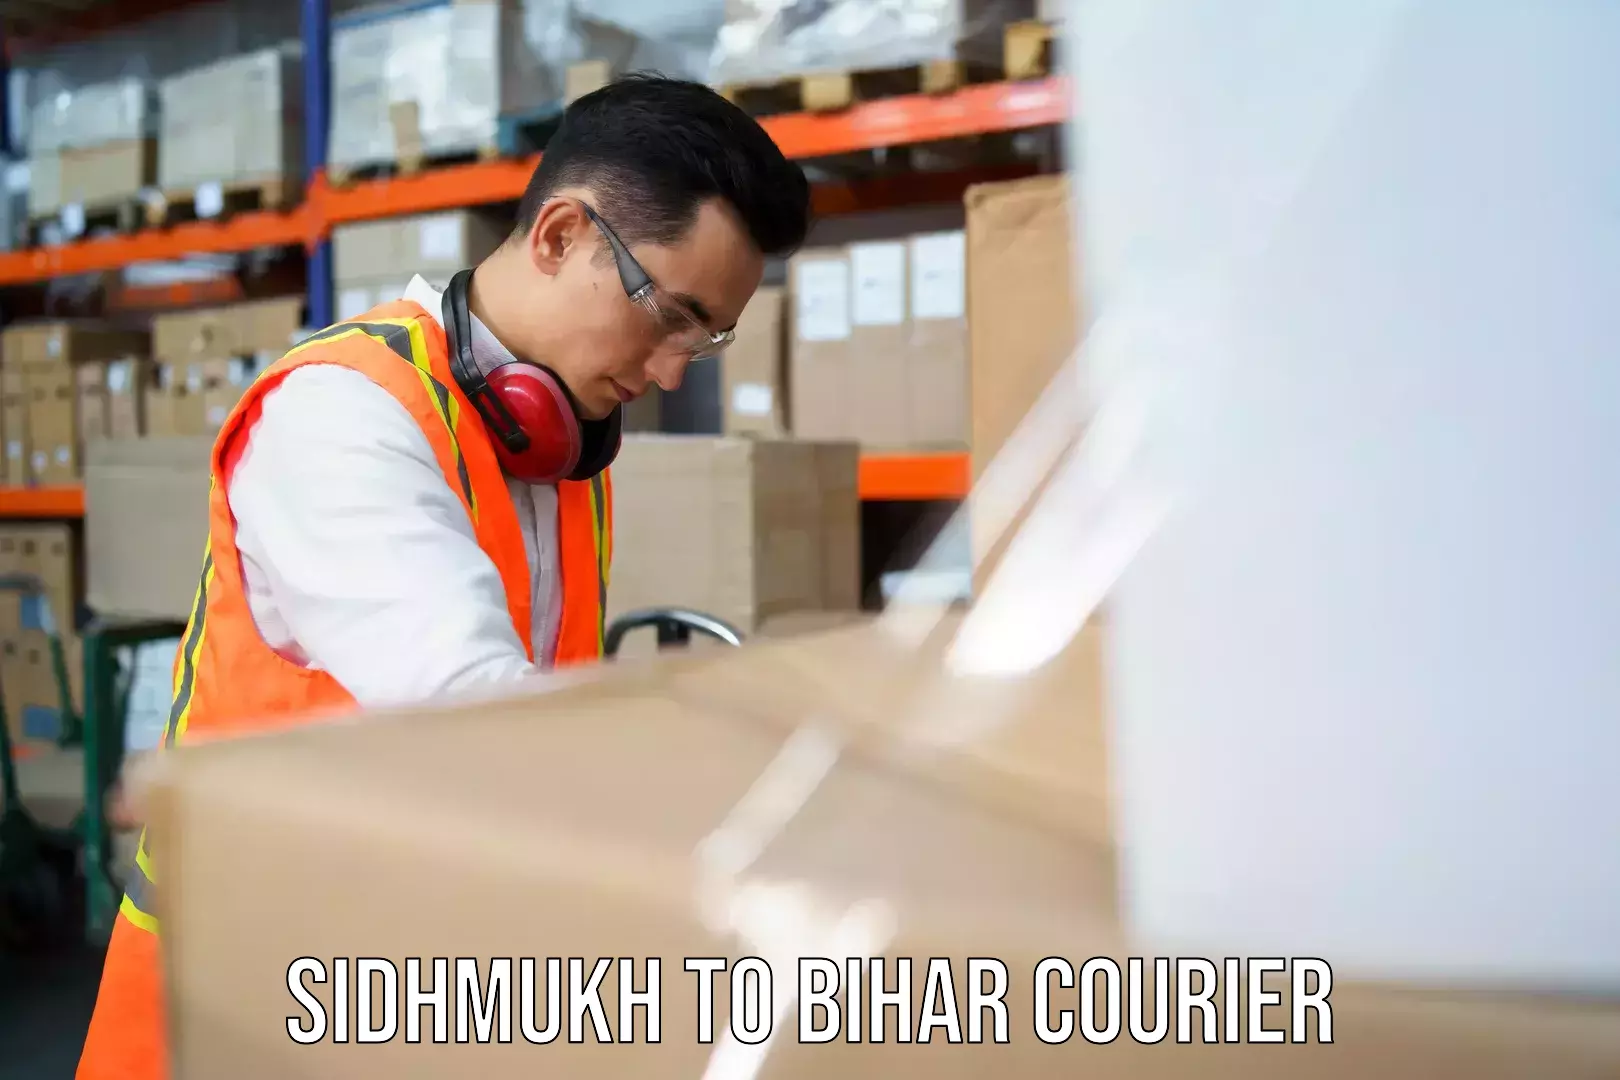 User-friendly delivery service Sidhmukh to Maheshkhunt